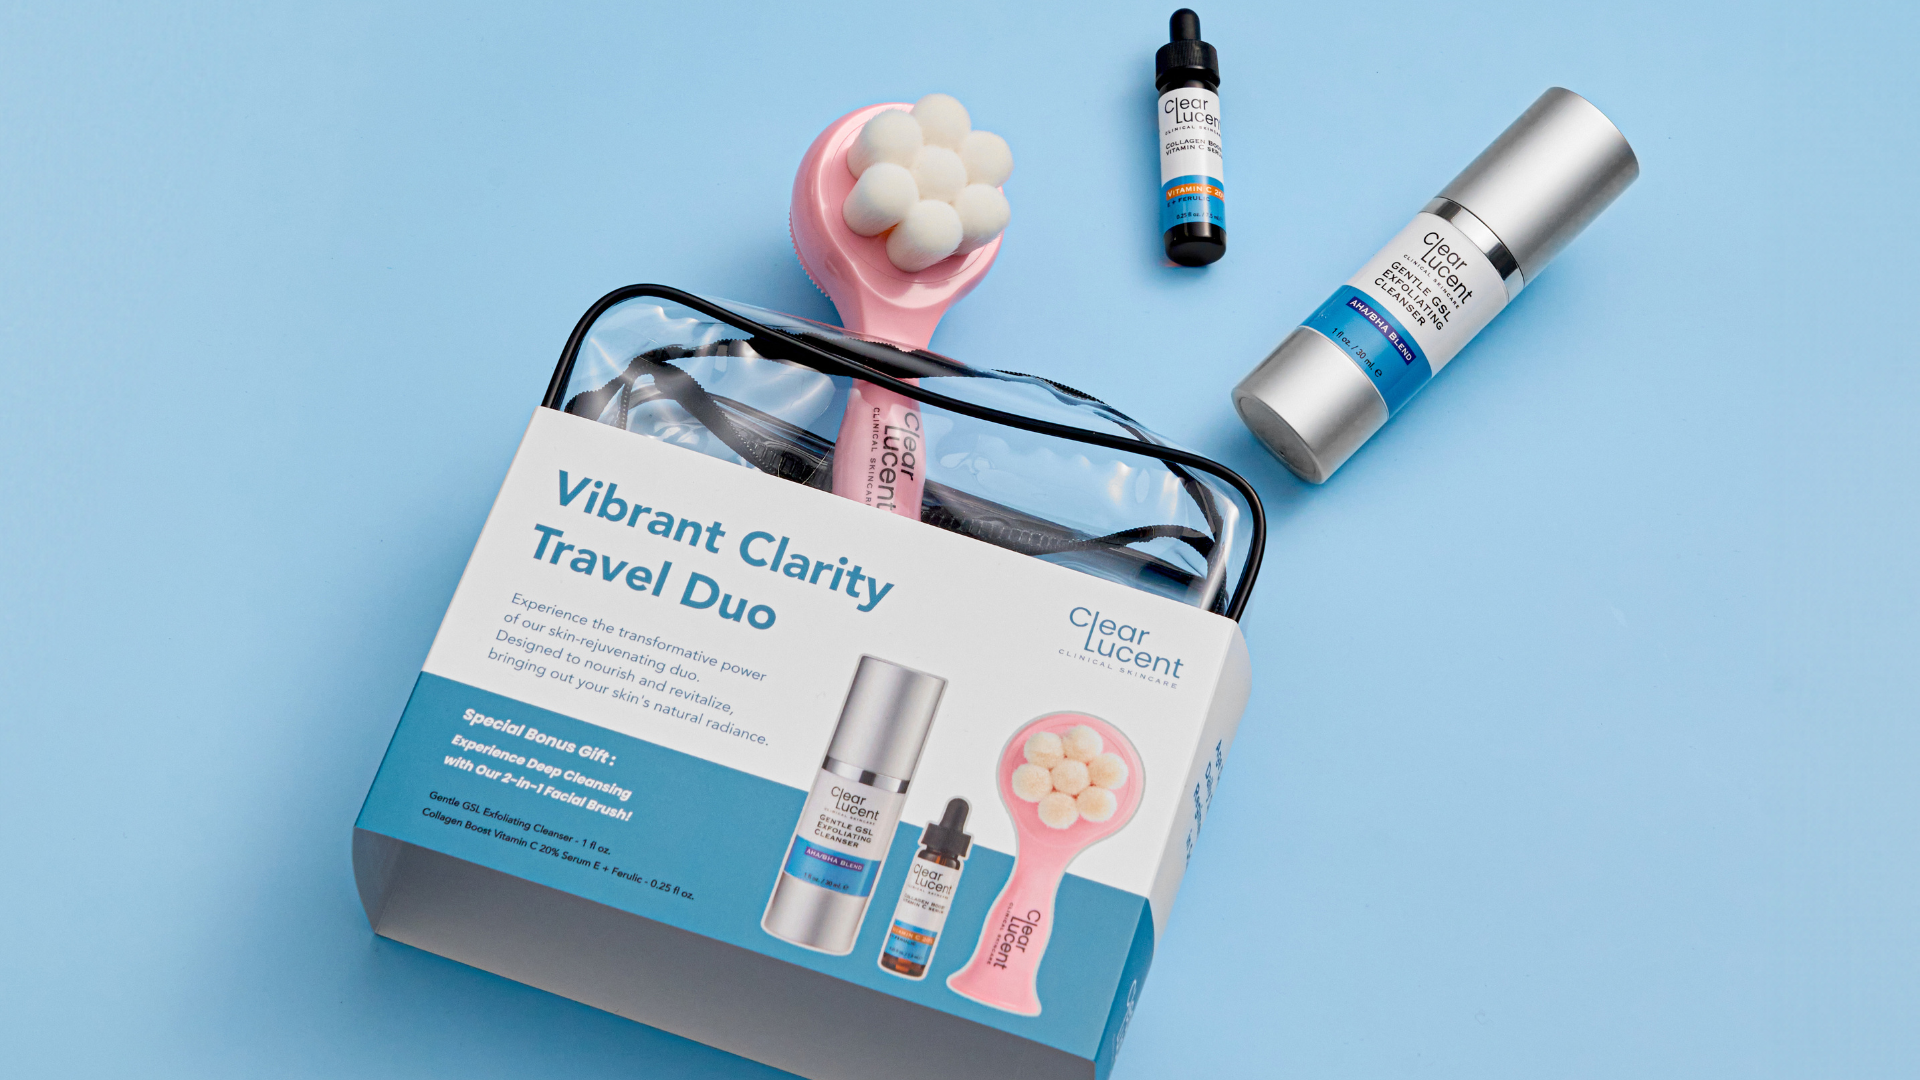 The Ultimate Travel Kit: ClearLucent's Vibrant Clarity Travel Duo